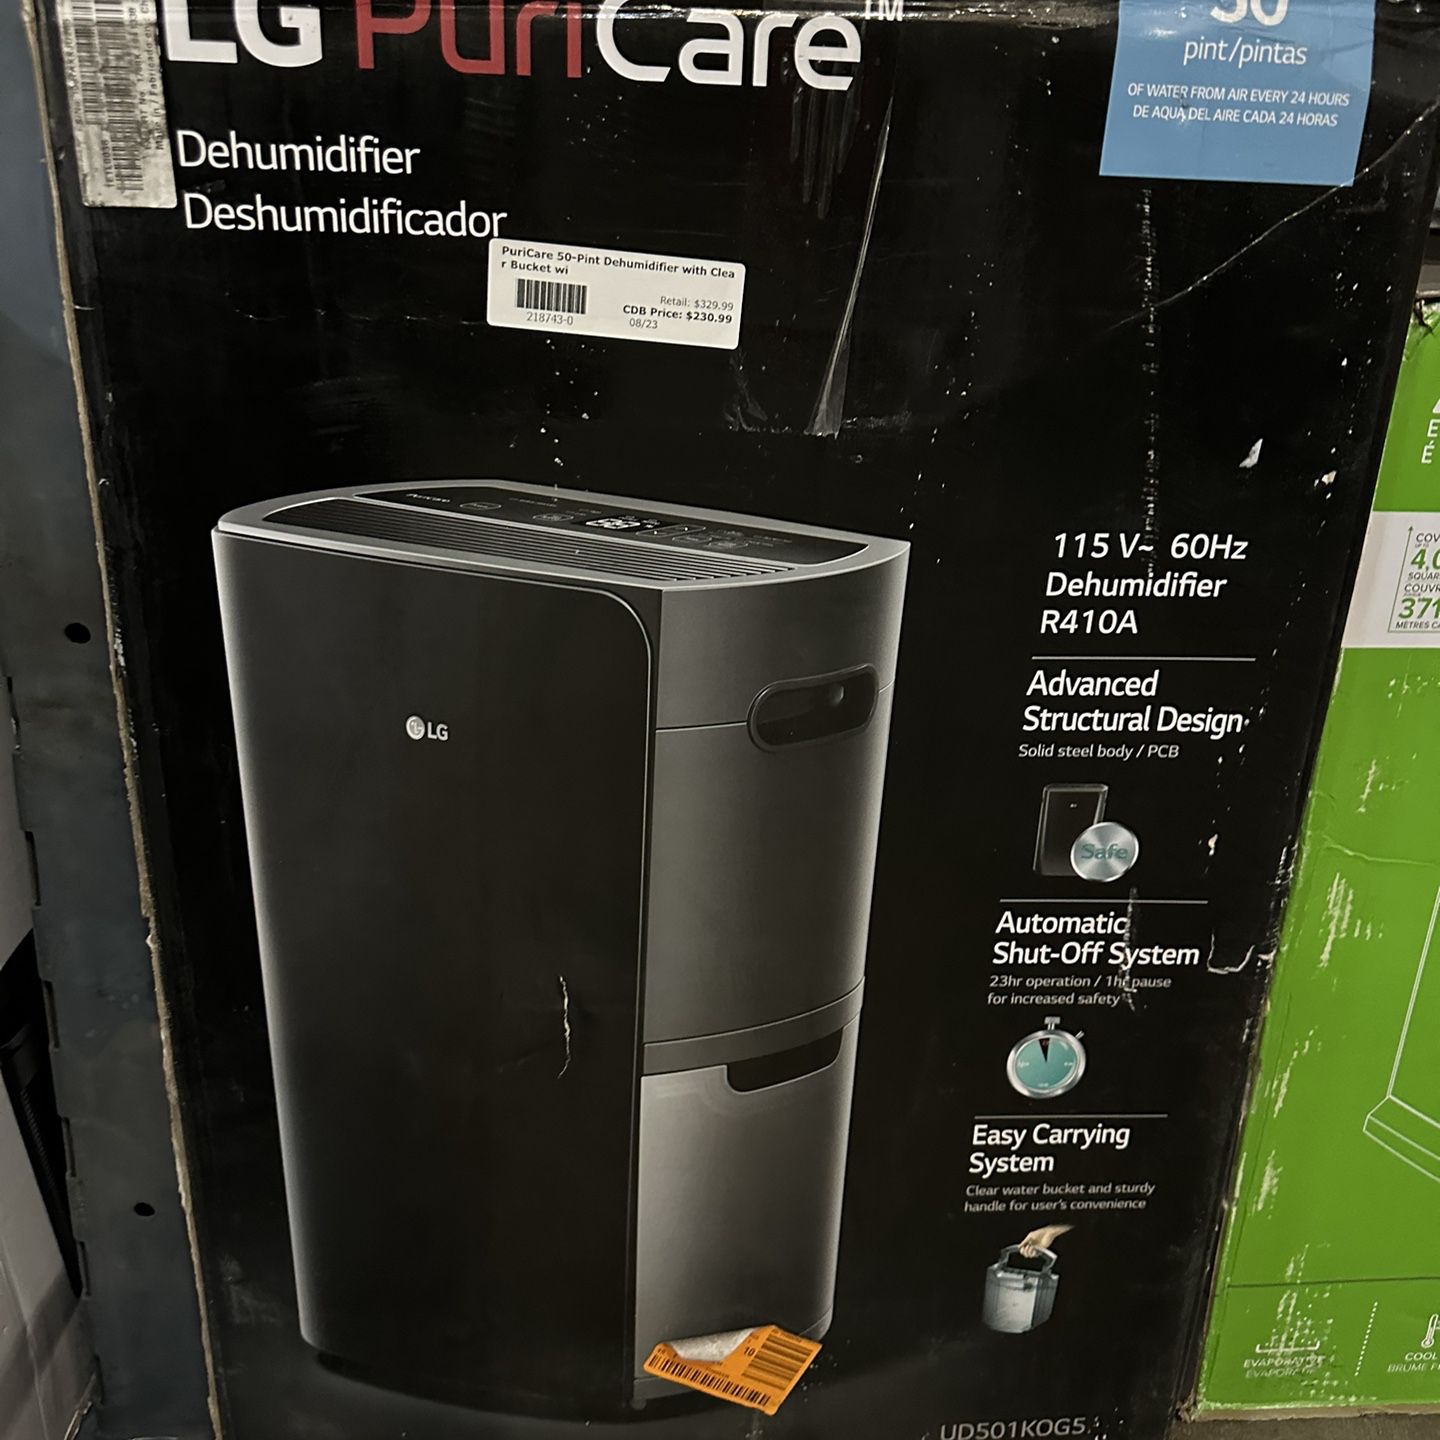 PuriCare 50-Pint Dehumidifier with Clea r Bucket wi